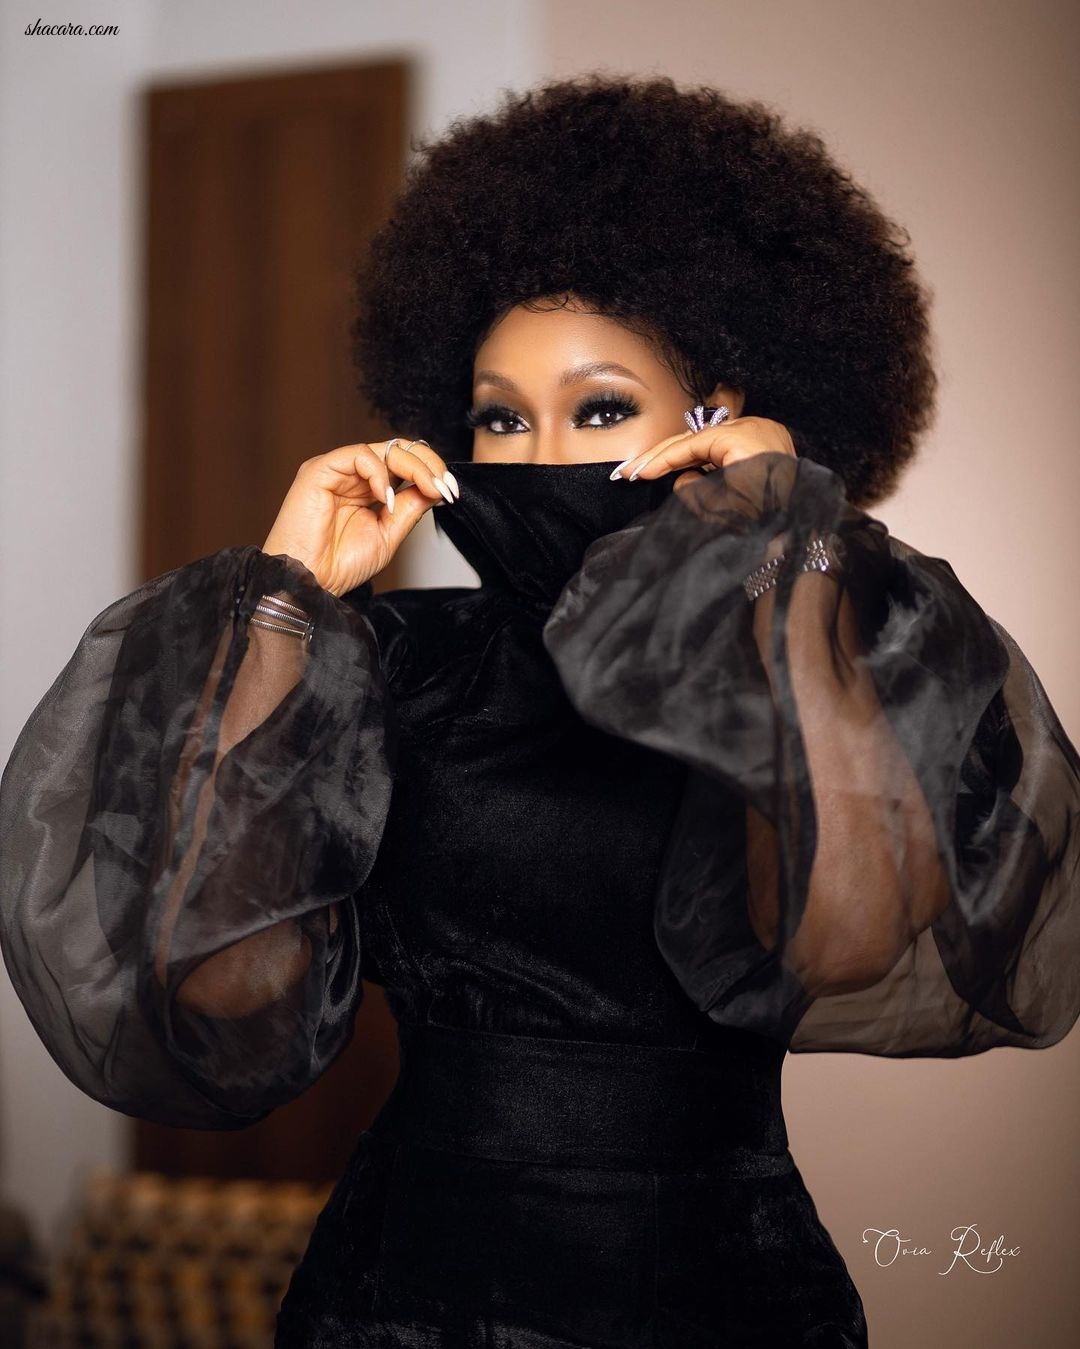 Rita Dominic Keeps Nailing Her Looks, And This New Outfit Adds Proof